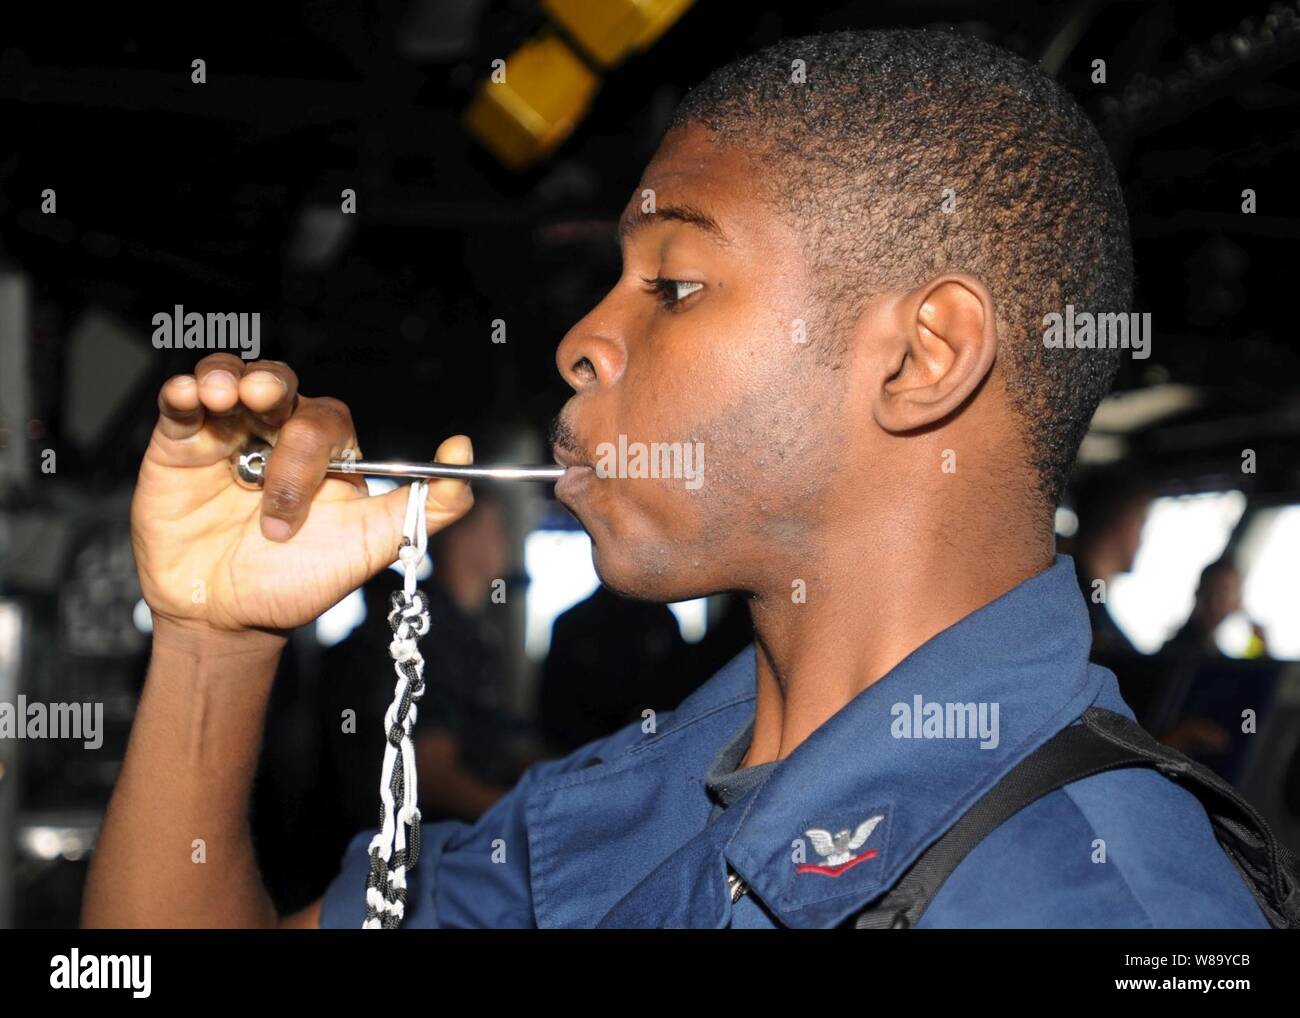 U.S. Navy Boatswain's Mate 3rd Class Aaron Shorts pipes the mess call into the main public address circuit aboard the amphibious assault ship USS Peleliu (LHA 5) underway in the north Arabian Sea in support of disaster relief operations in Pakistan on Sept. 4, 2010. Stock Photo